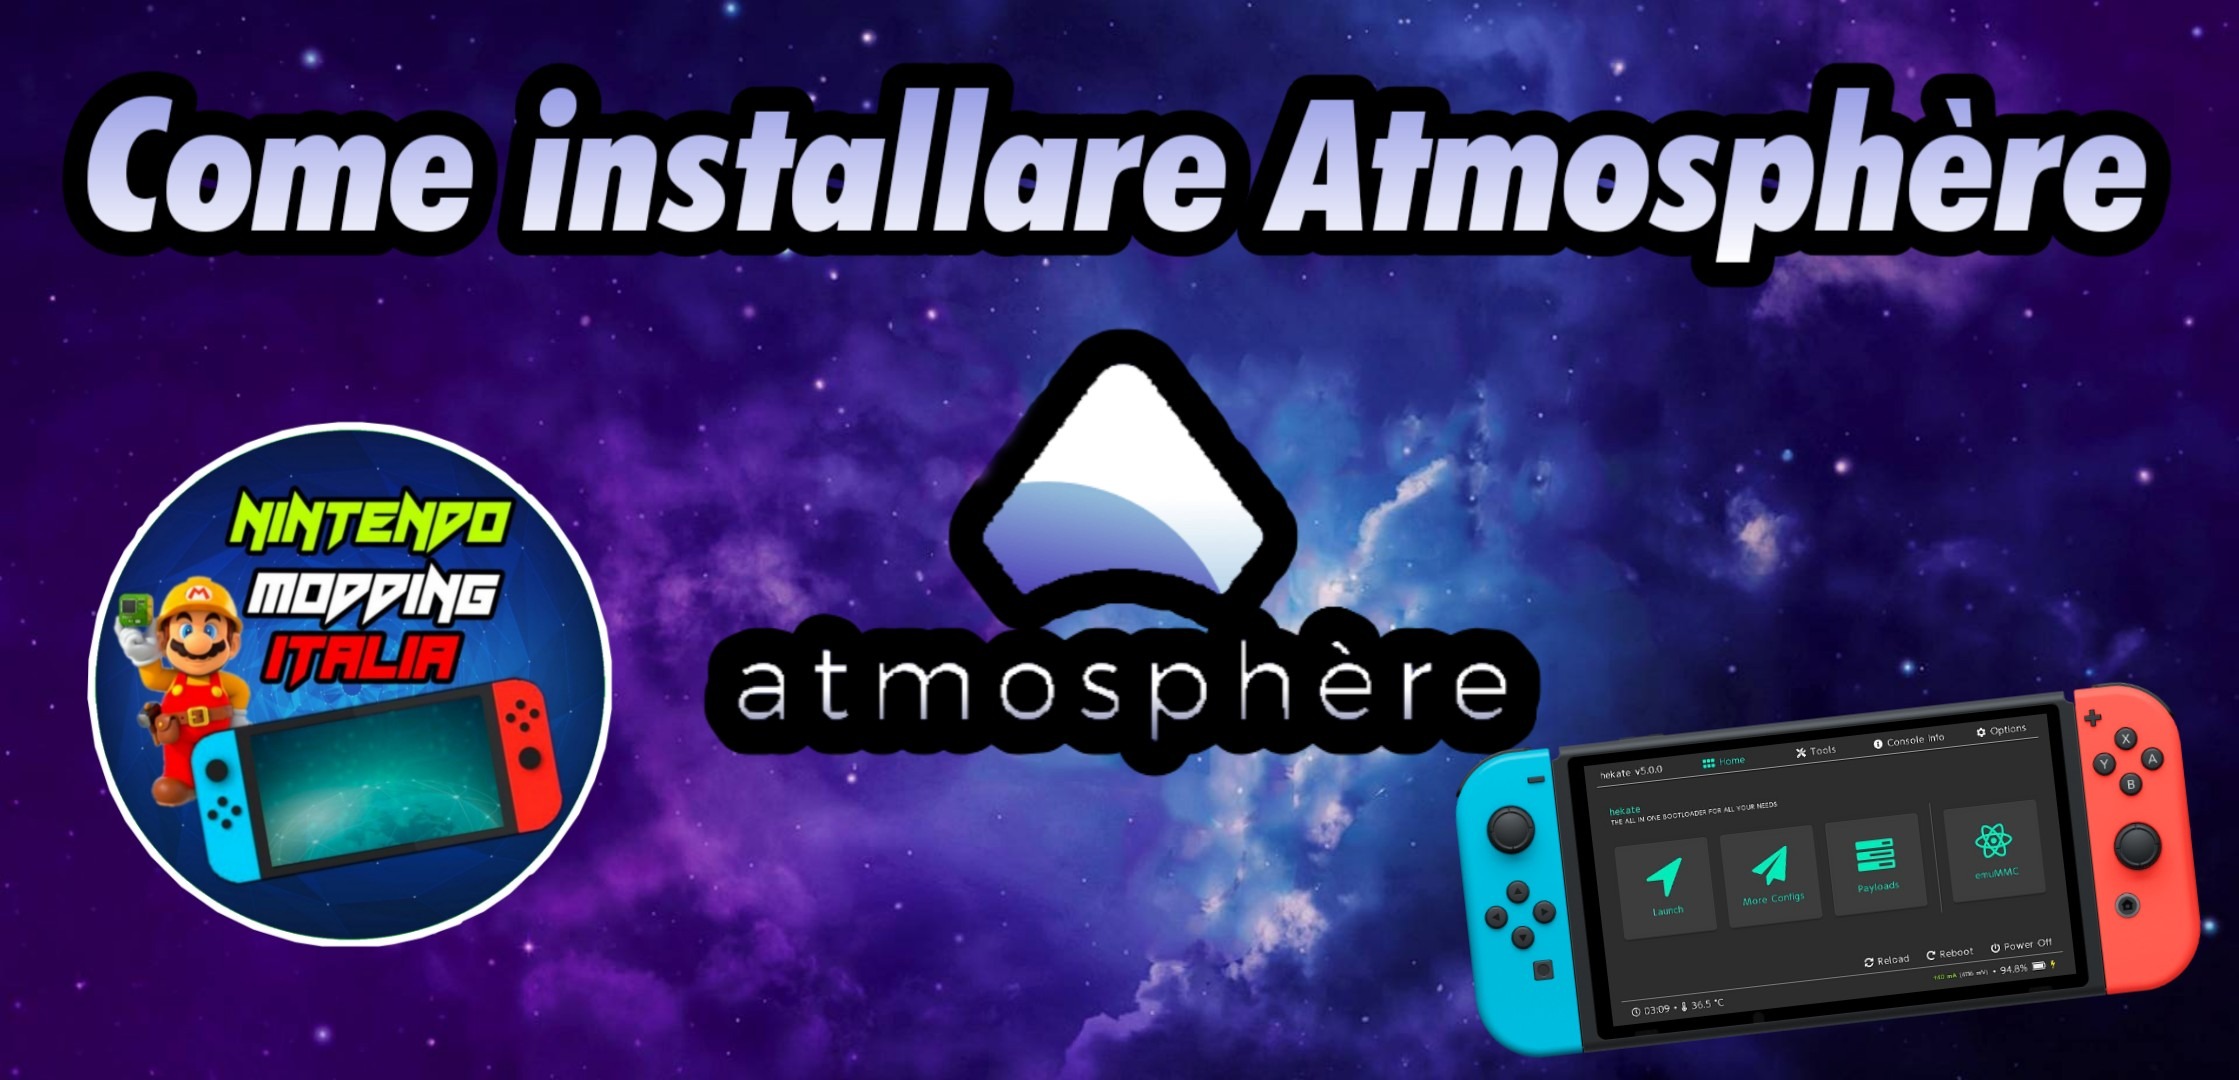 Switch atmosphere sigpatches